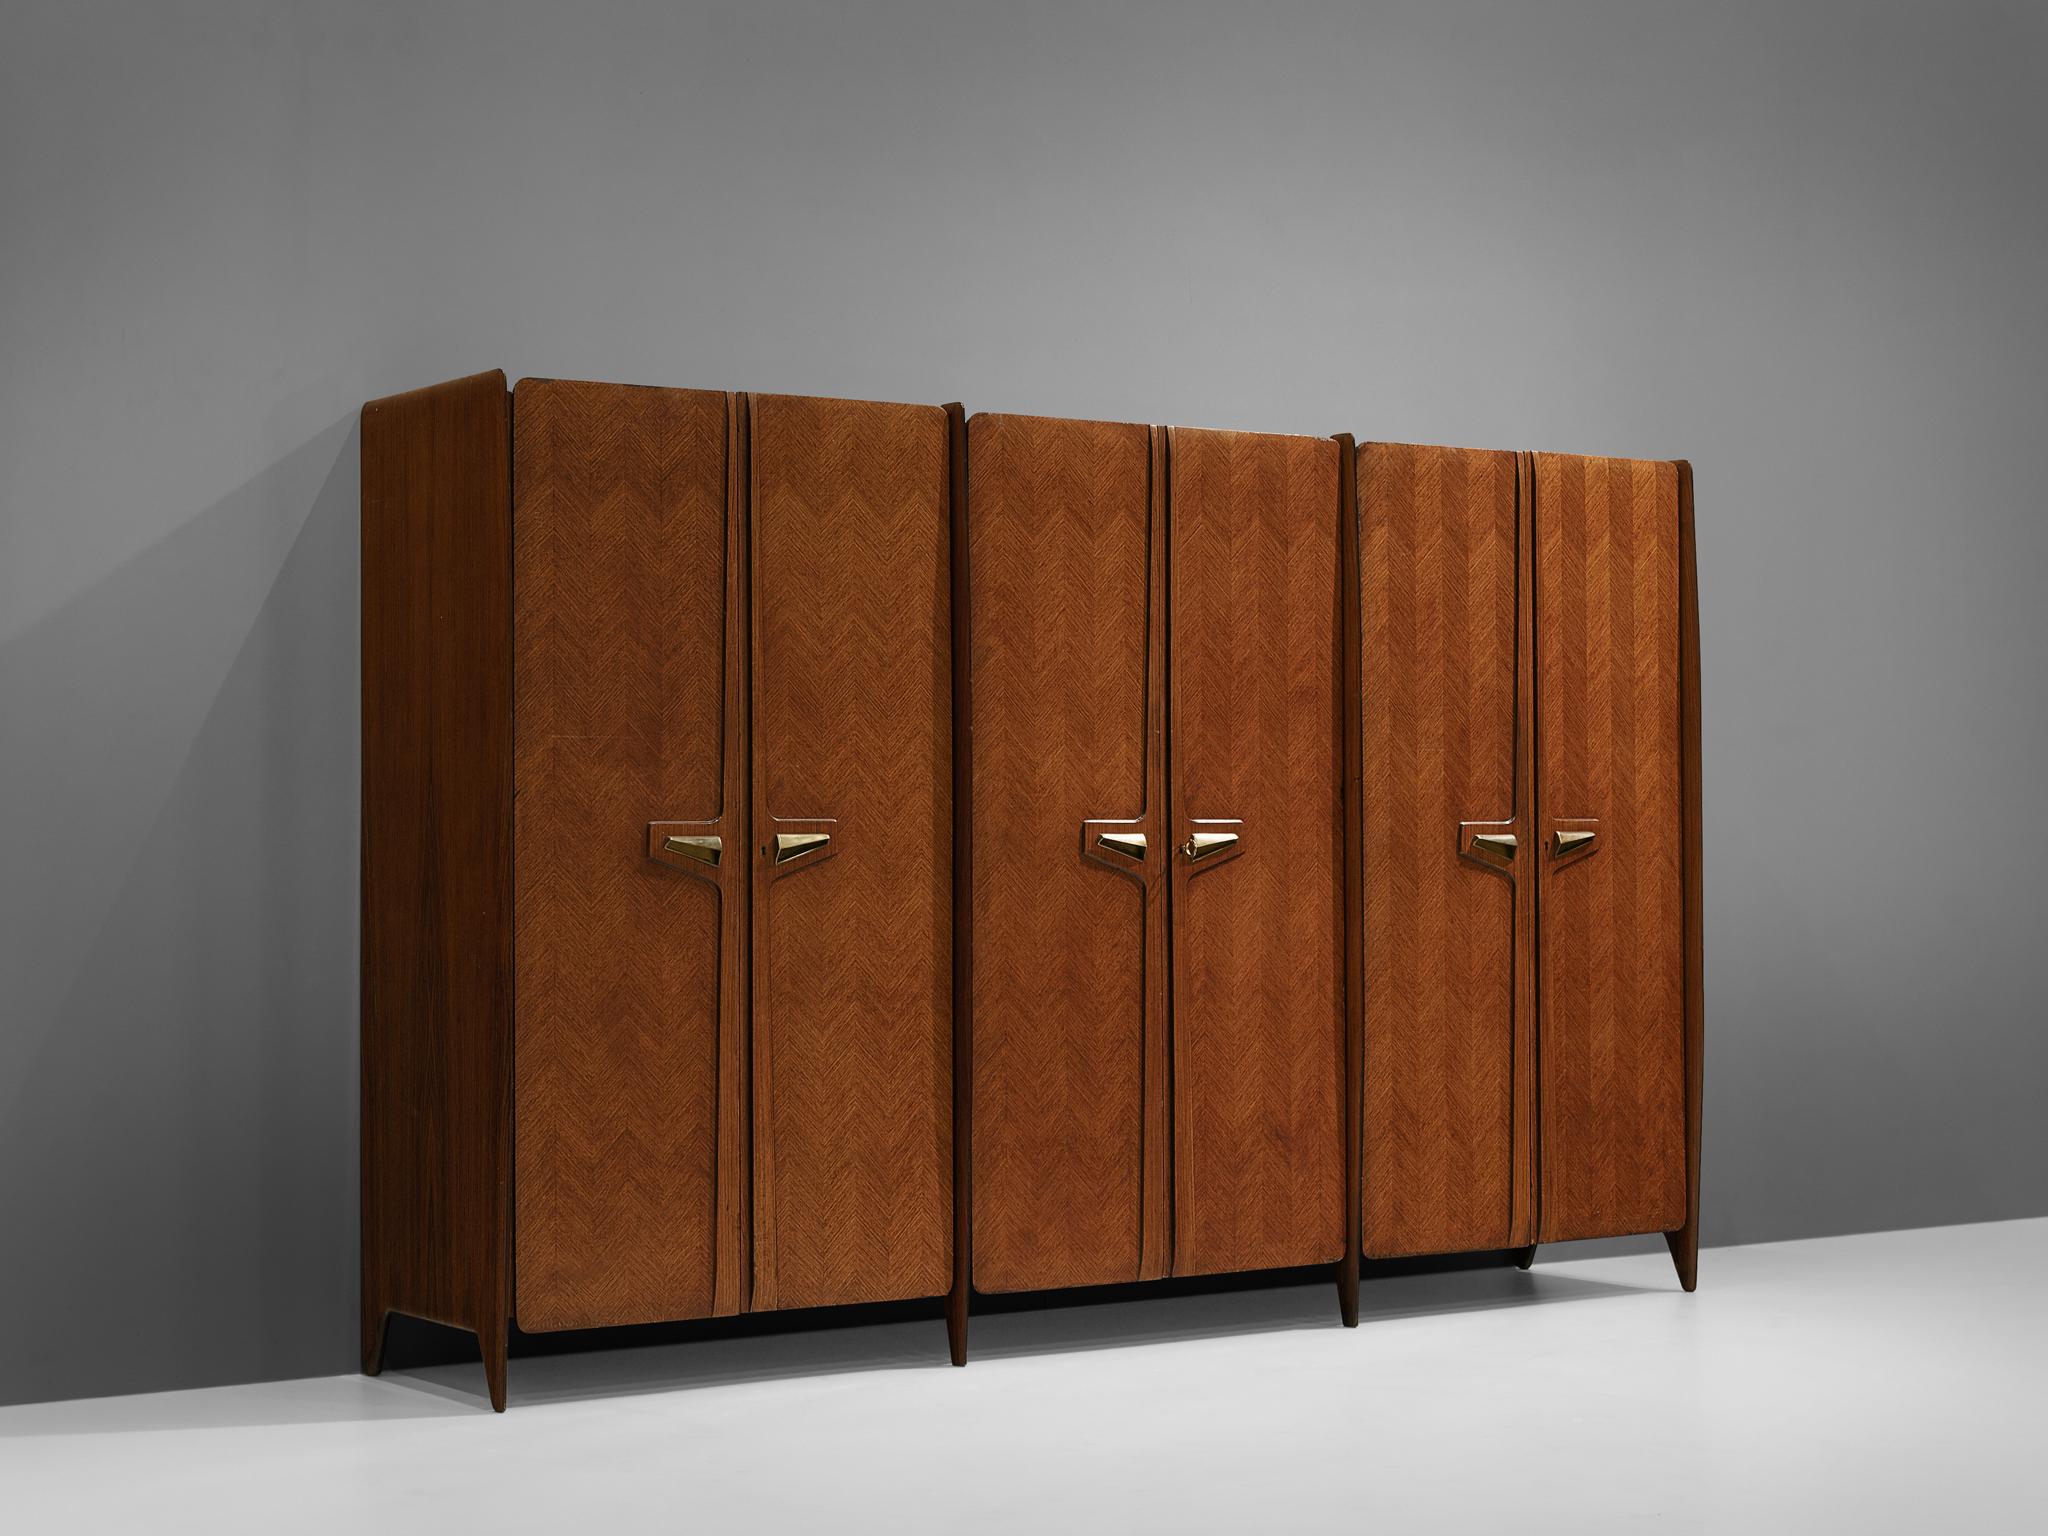 Large Italian wardrobe, walnut, brass, mirrored glass, Italy, 1950s

Gorgeous wardrobe or large cabinet designed in Italy in the 1950s. The overall glamorous feel of this wardrobe is overwhelming. With many beautiful details this piece definitely